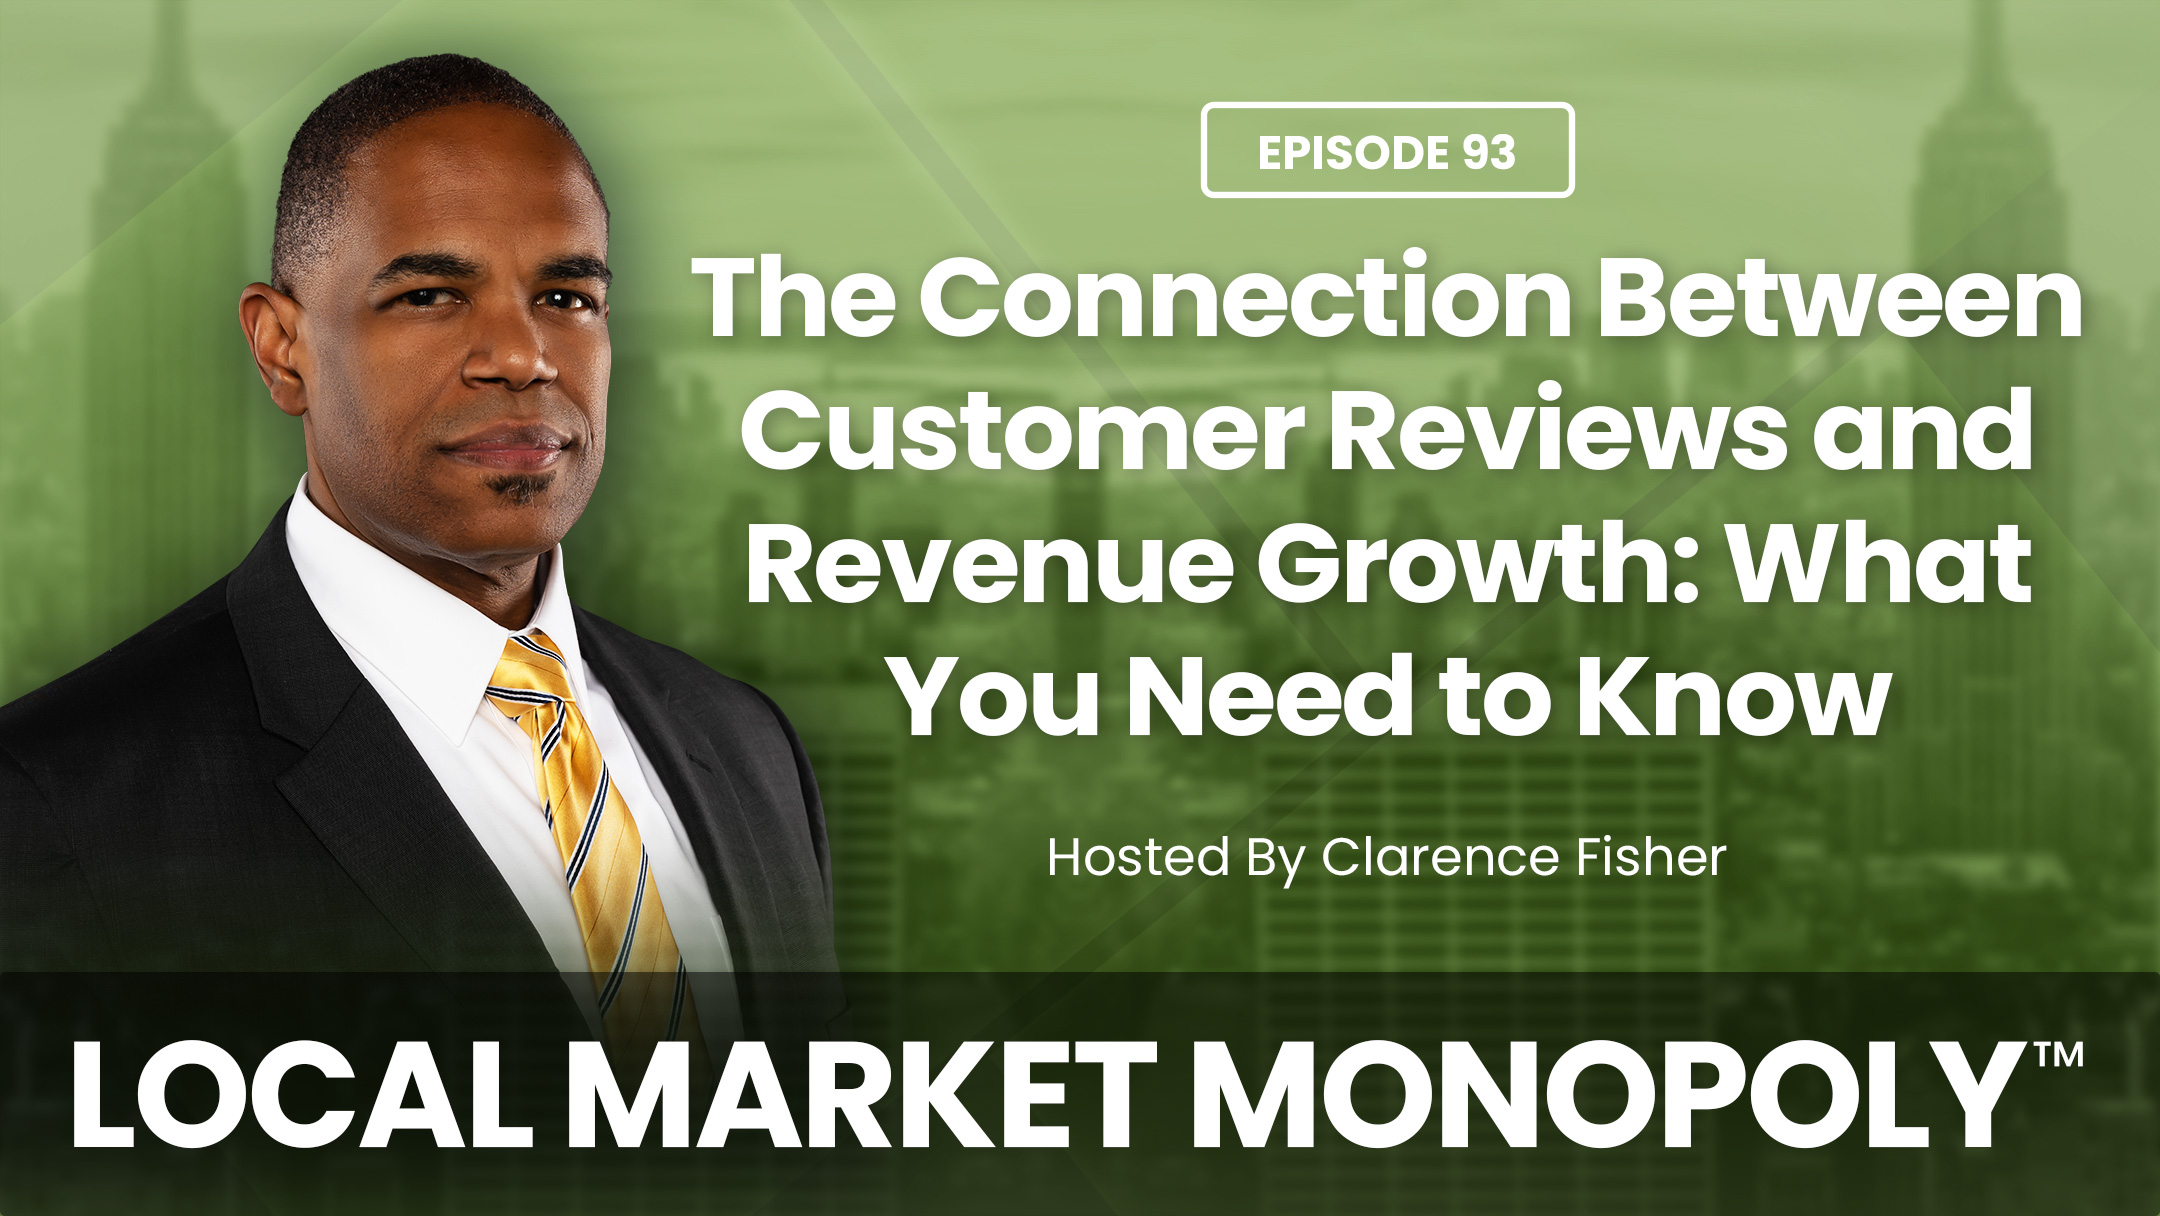 Leverage Customer Reviews for Revenue Growth